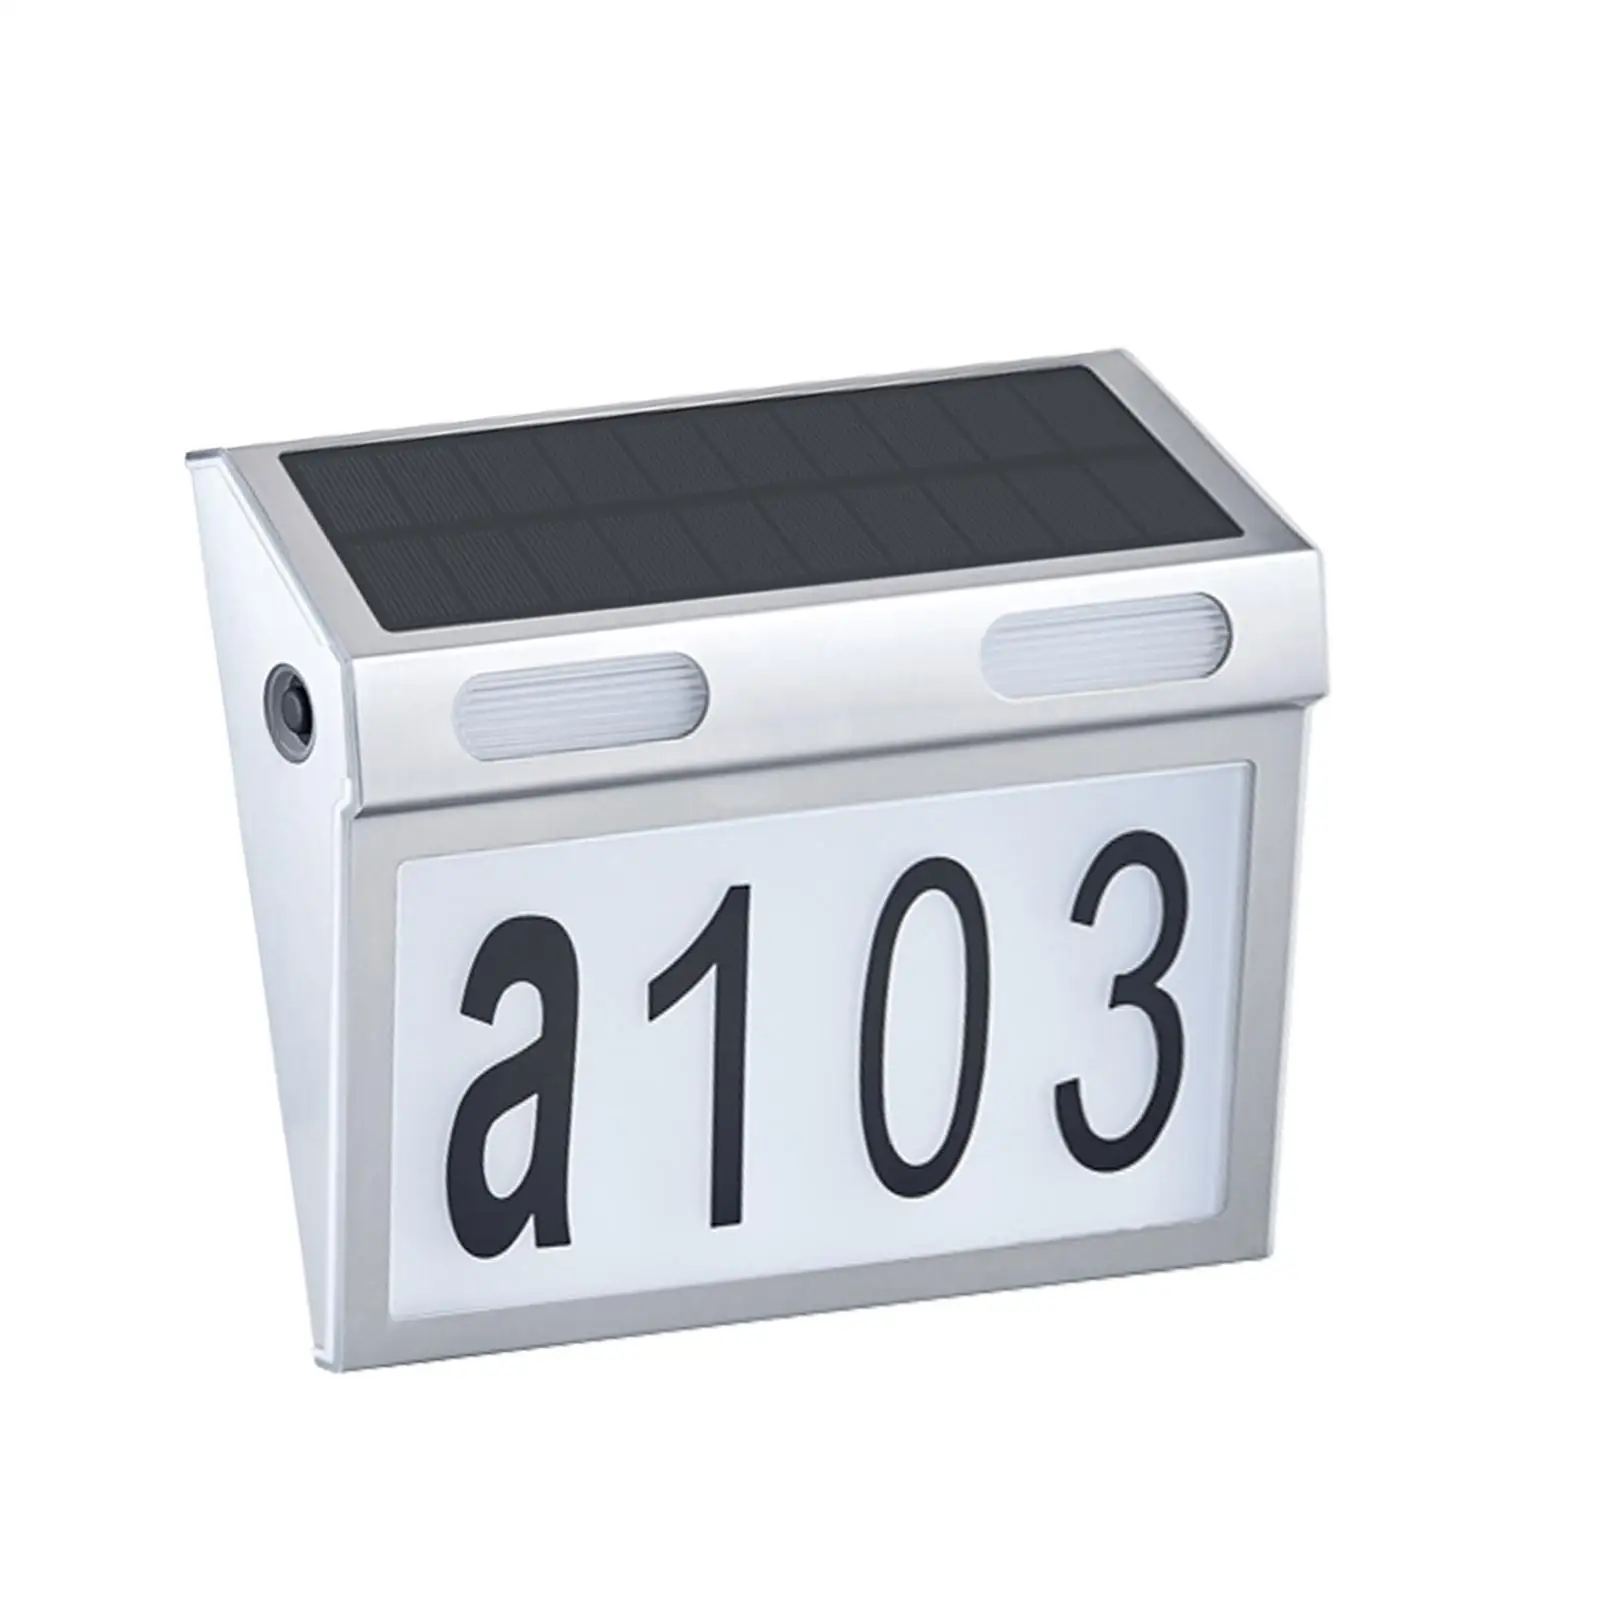 Solar House Number Sign Solar Powered Wall Mounted Waterproof Lights Lighted Numbers for Yard Outside Driveway Decoration